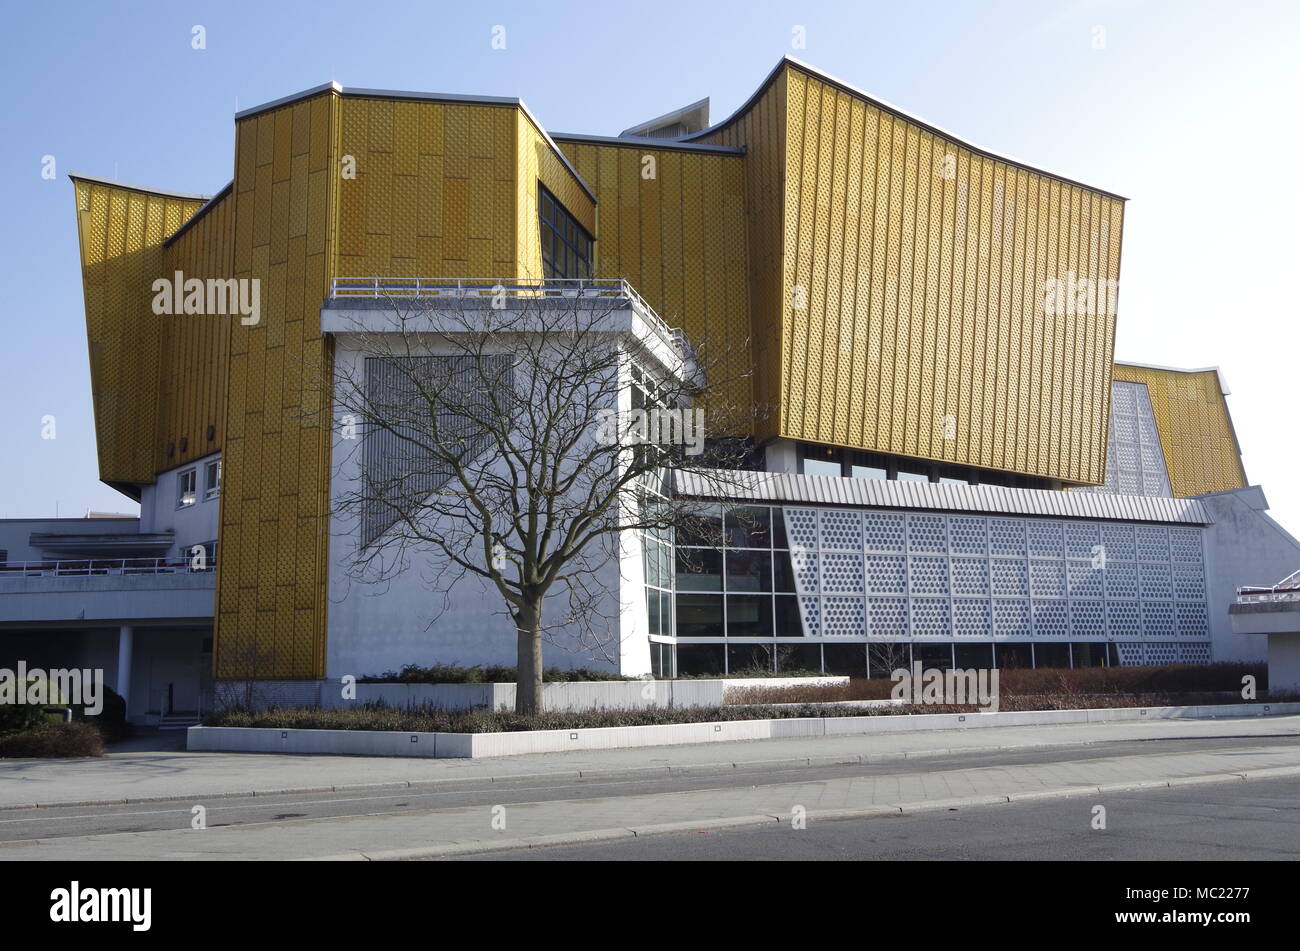 The Berliner Philharmonie concert hall, home to the Berlin Philharmonic Orchestra, architect Hans Scharoun, West end of chamber music hall Stock Photo